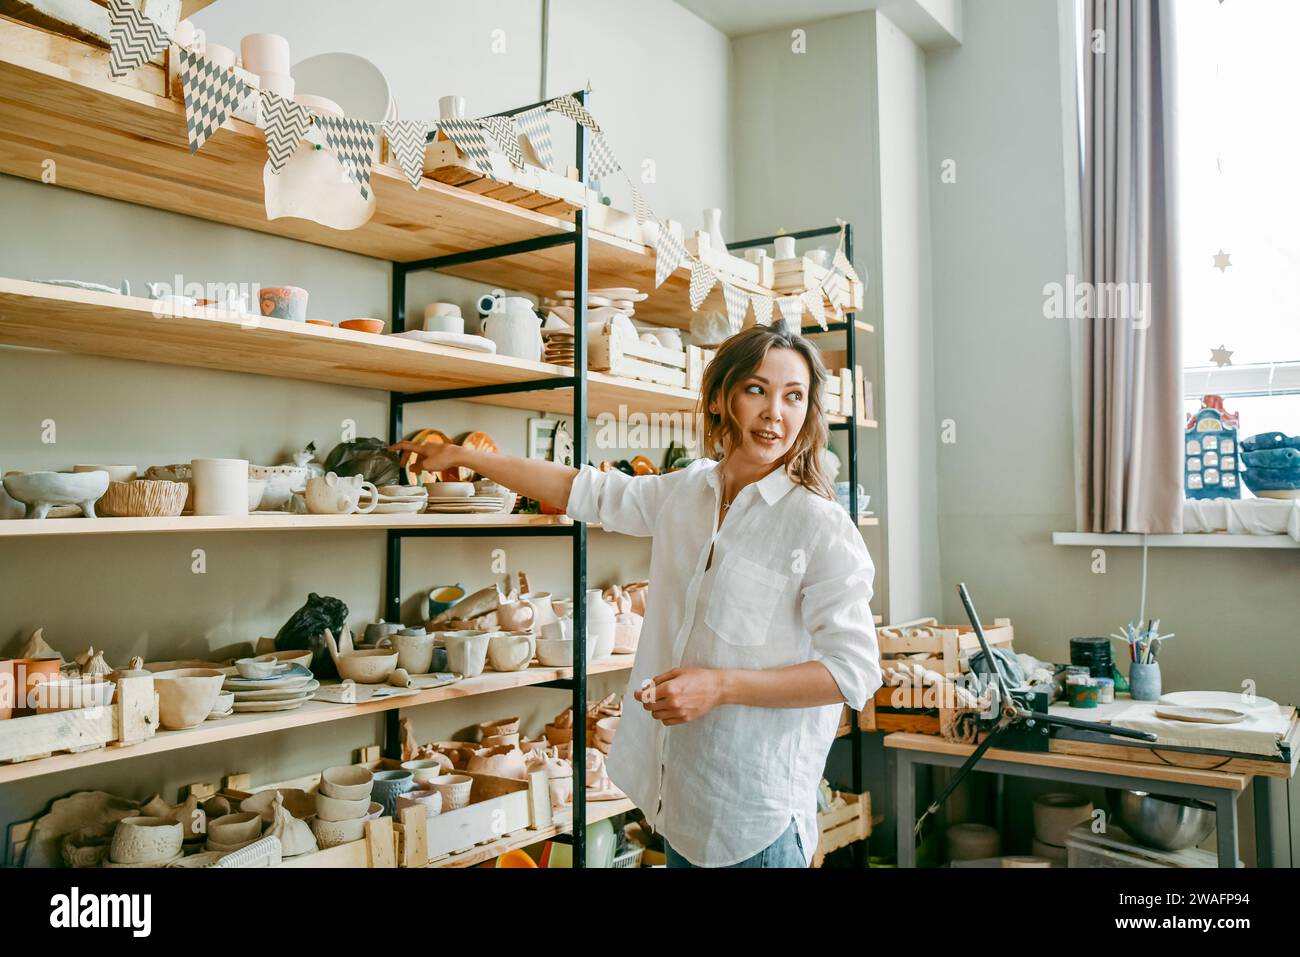 A woman head of pottery workshop near shelves with products Stock Photo